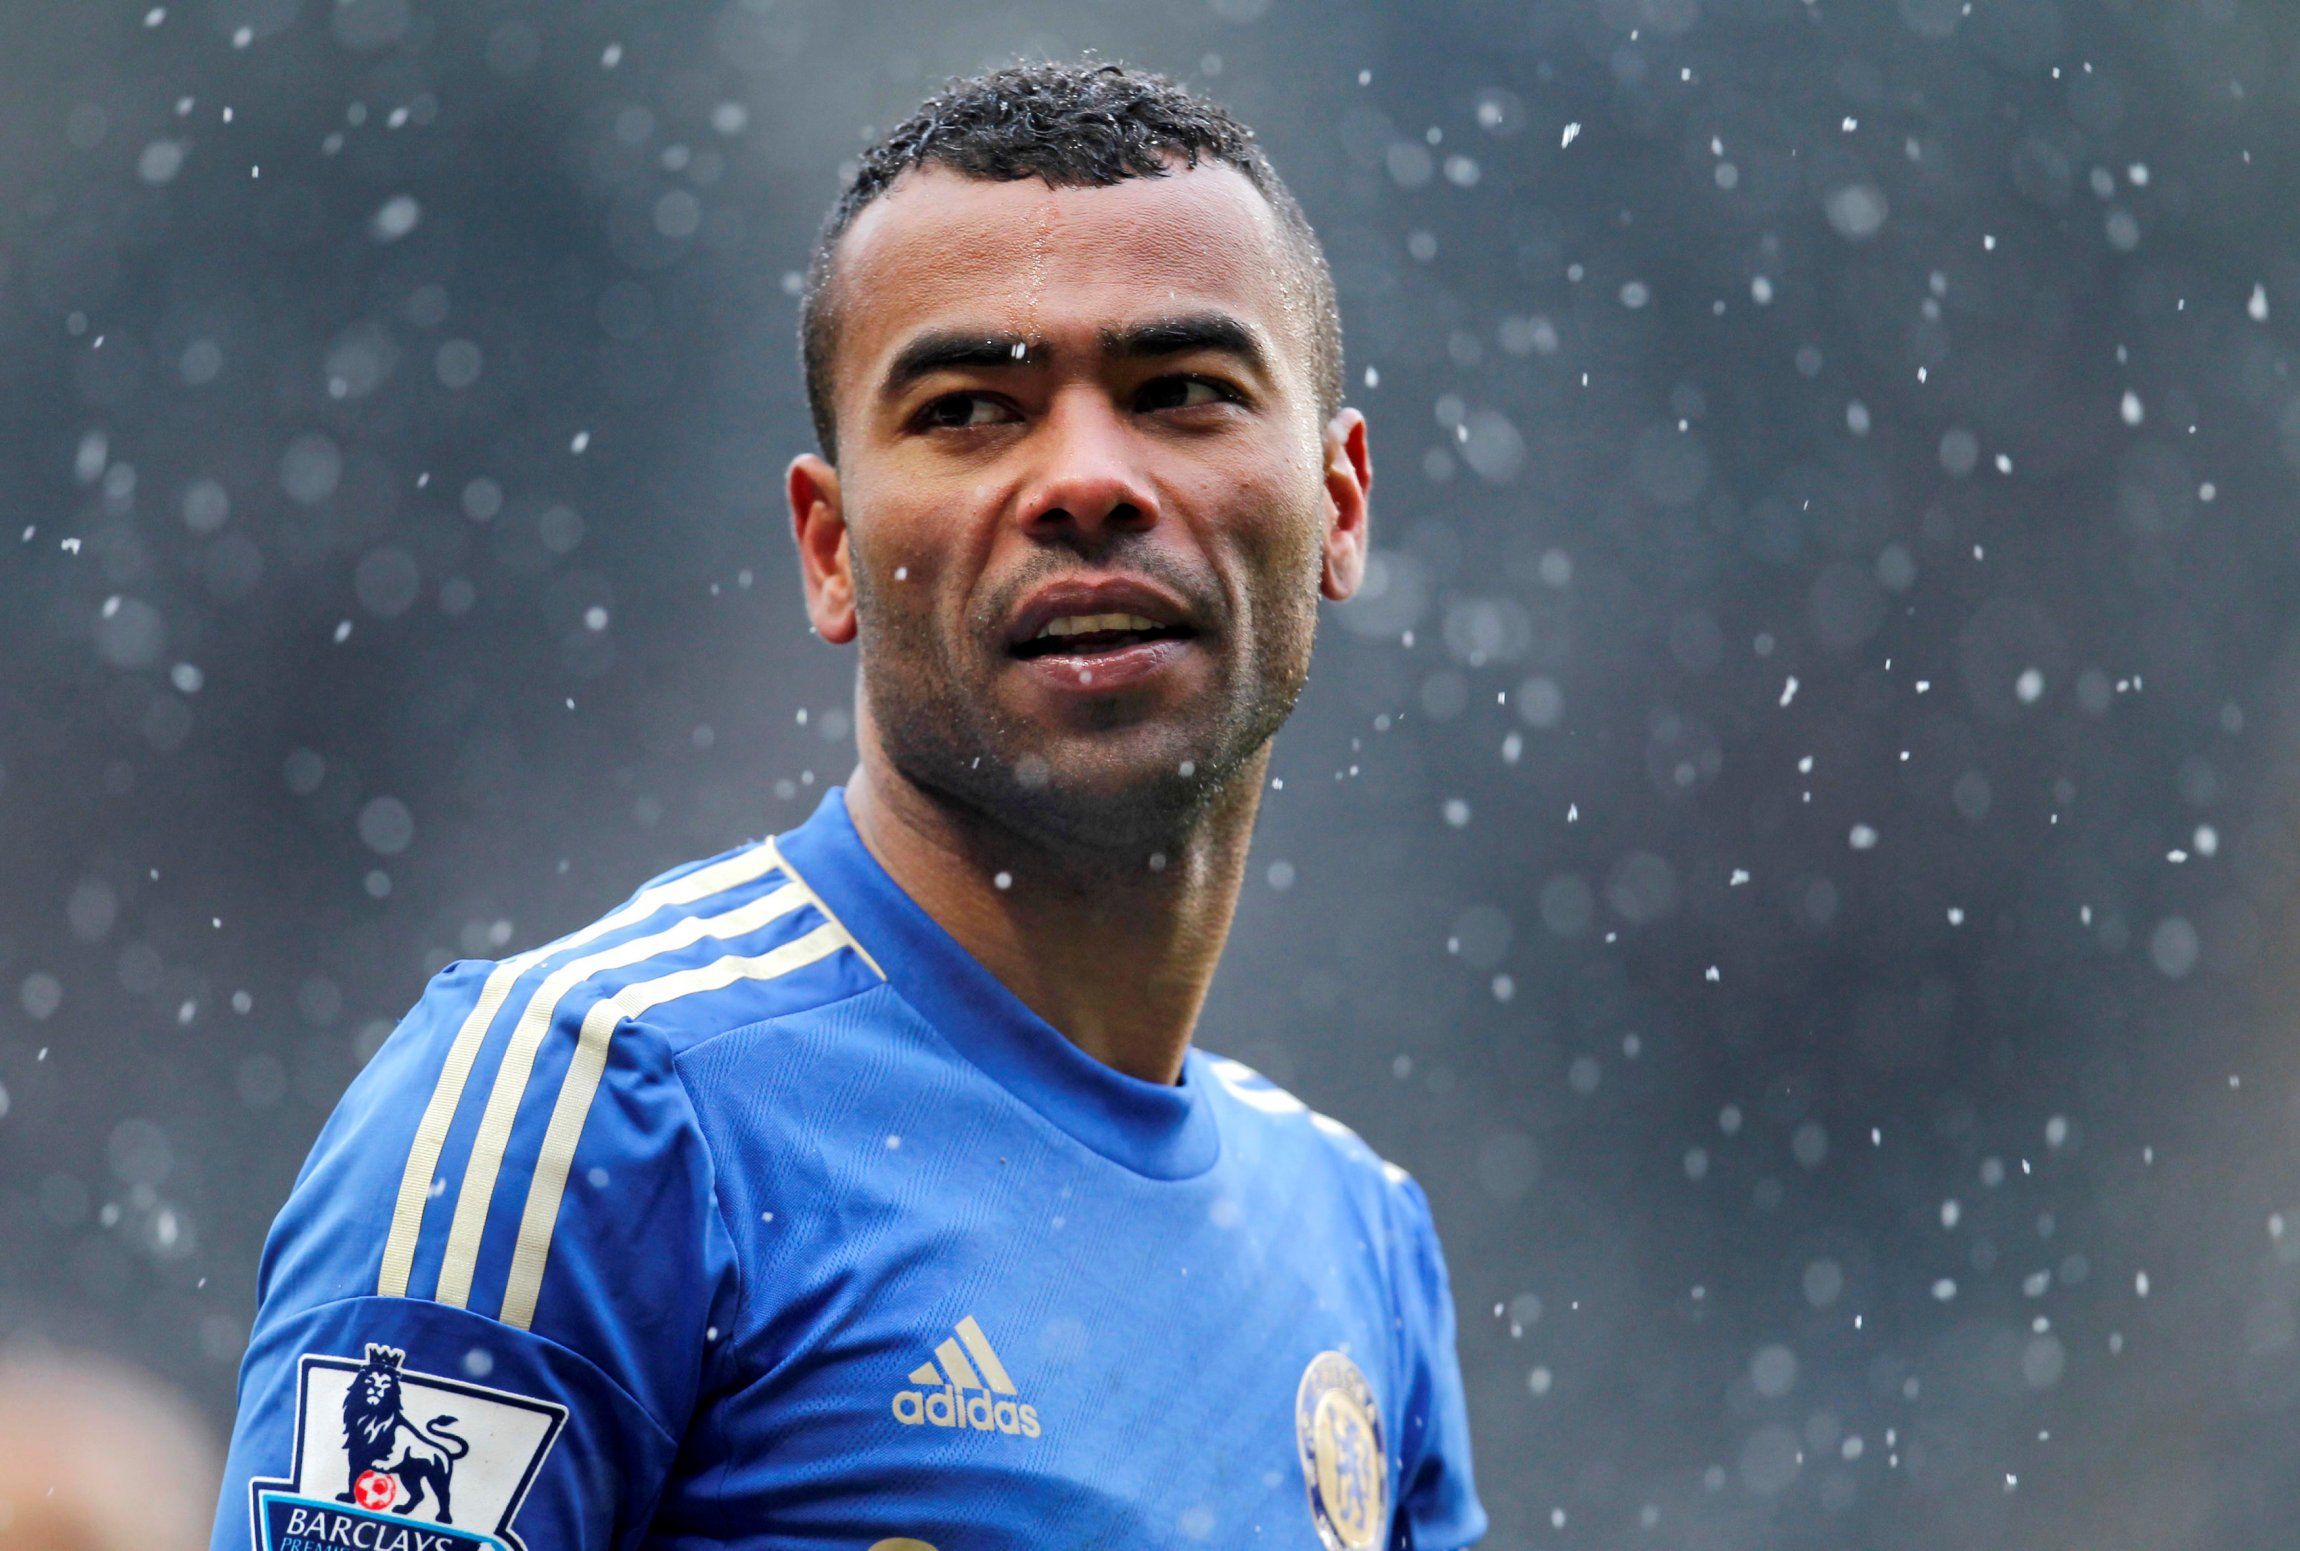 Retired England footballer Ashley Cole during his time with Chelsea